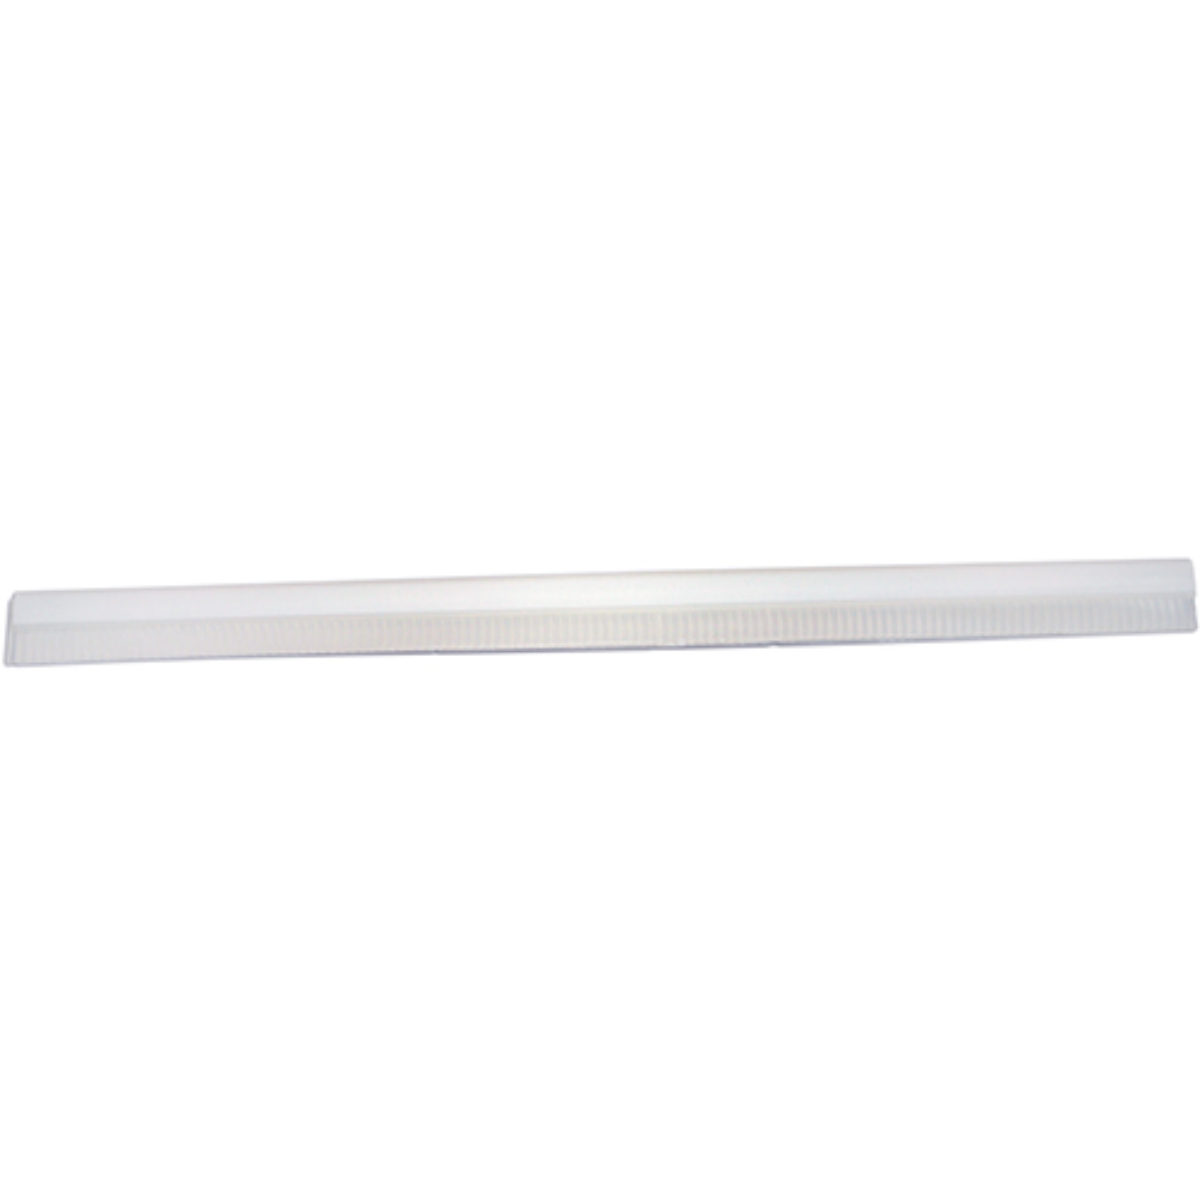 Window Squeegee And Handle Assembly - Kaivac, Inc.